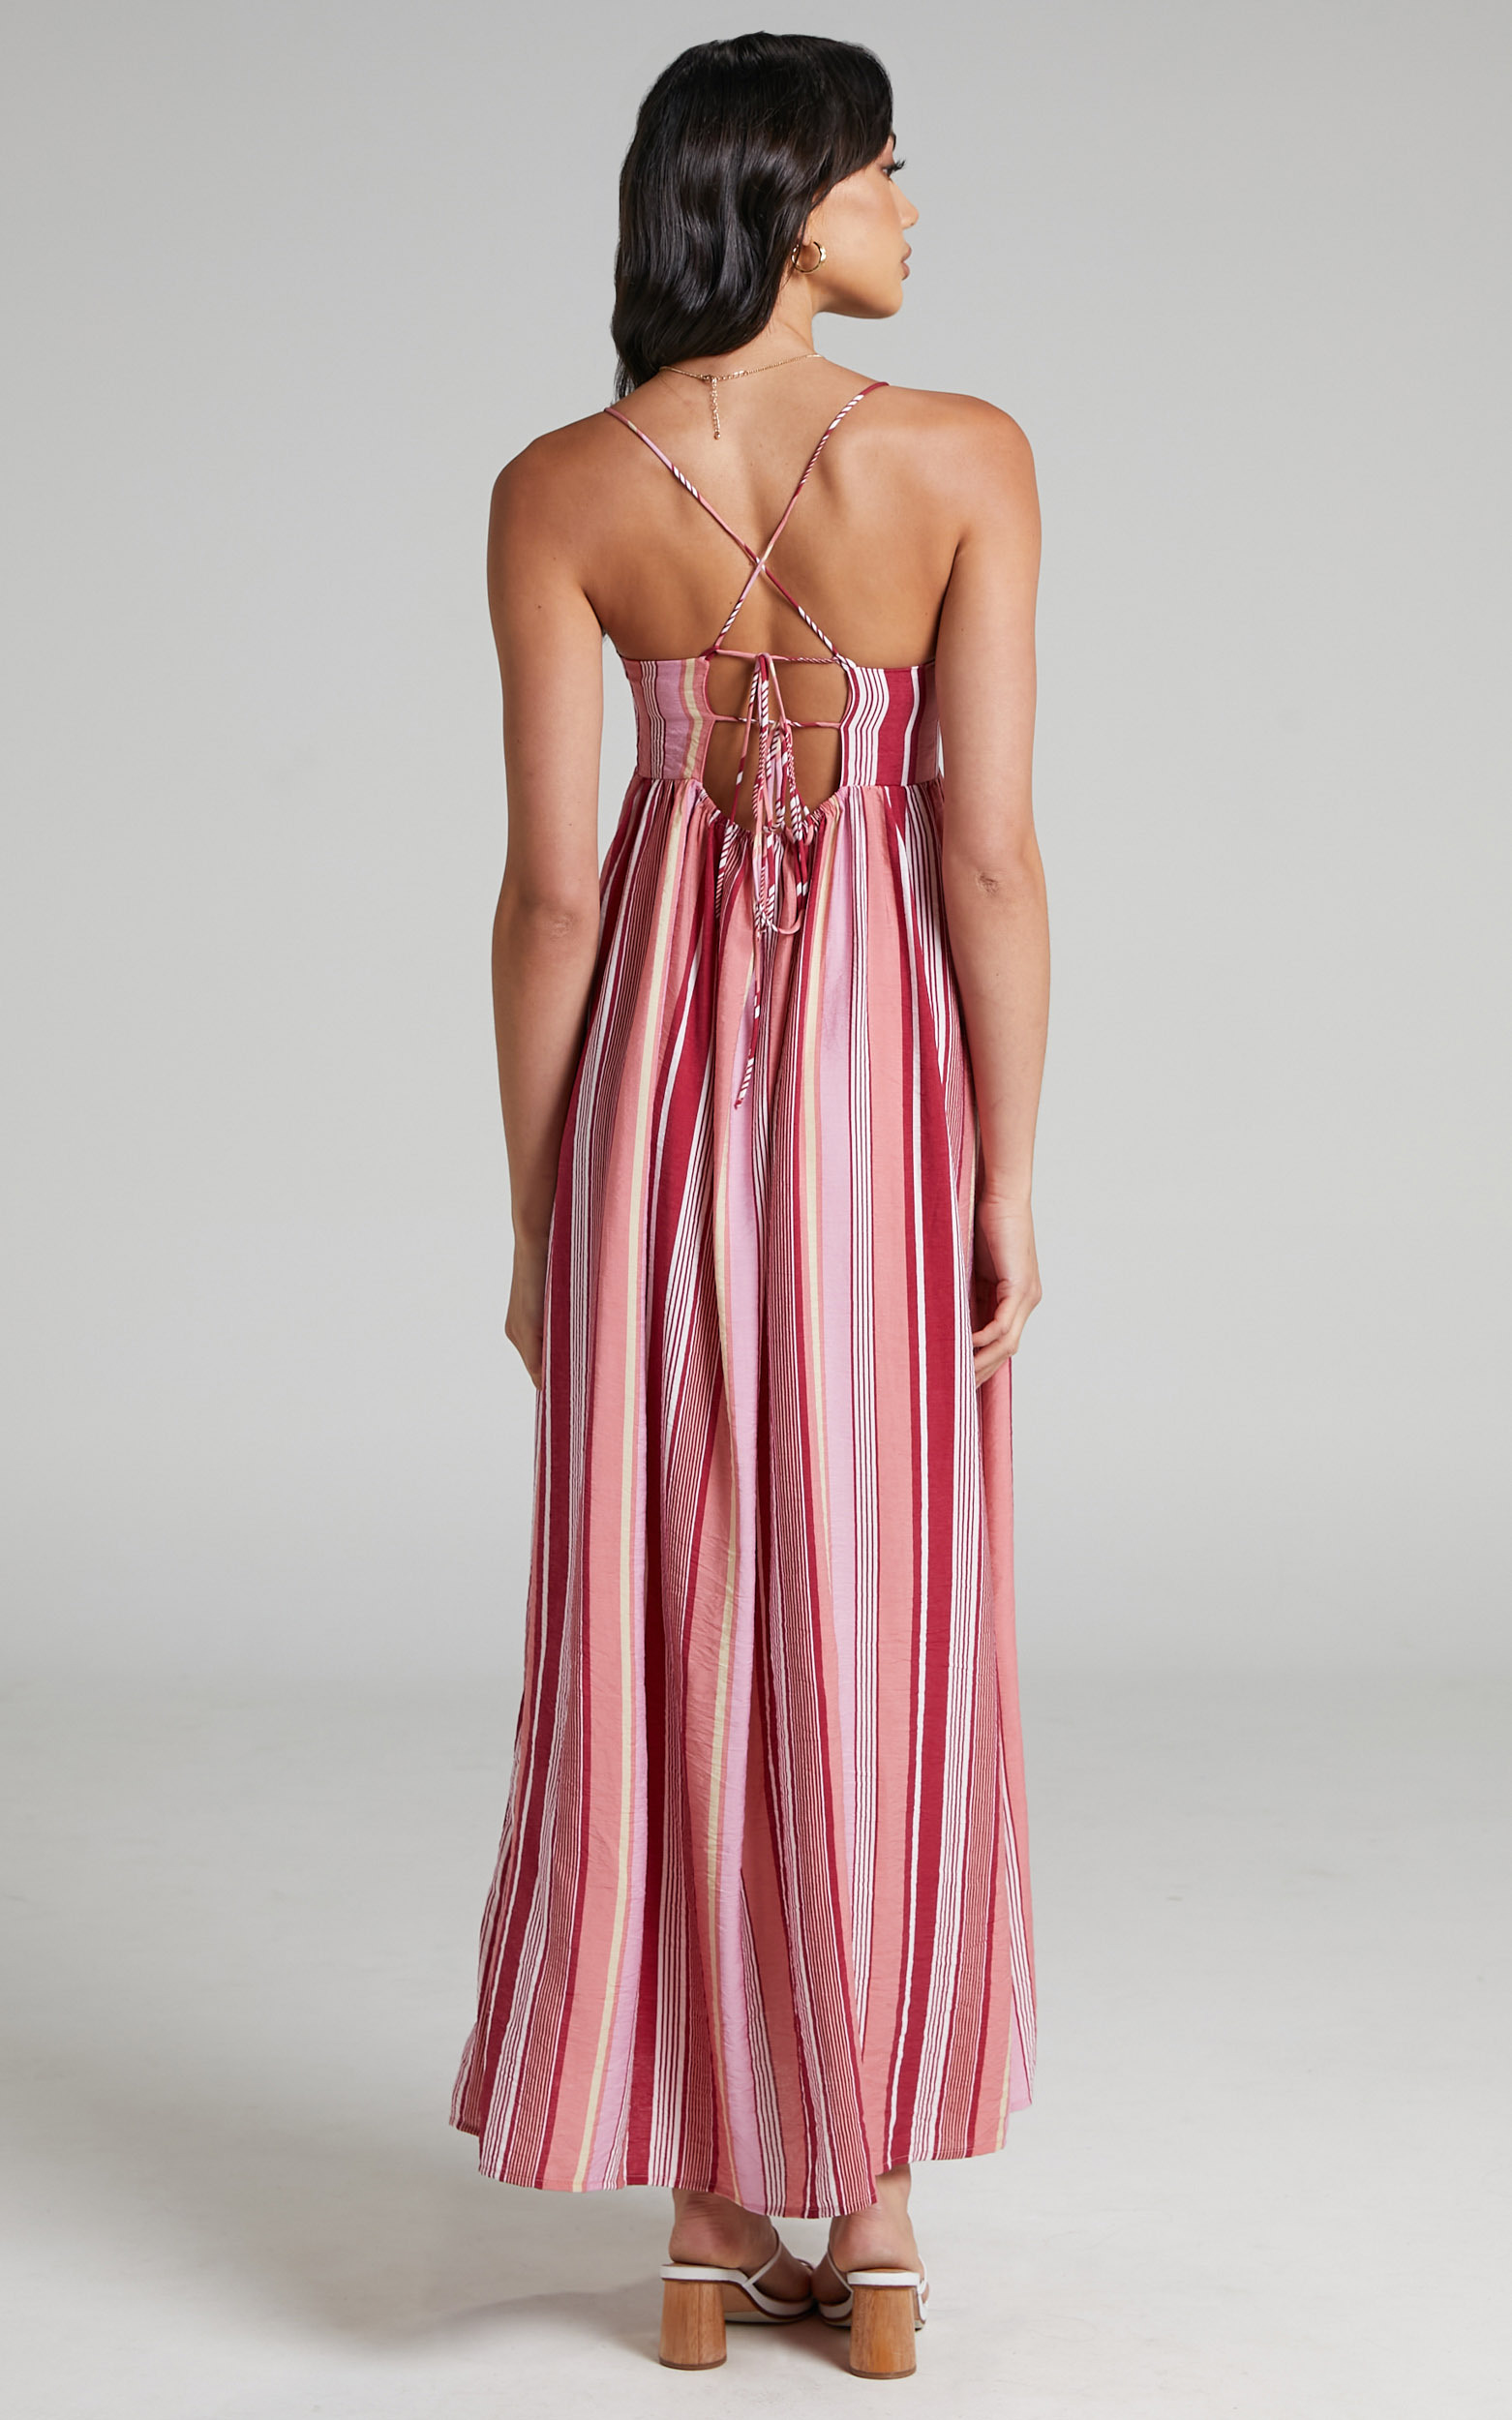 Chelcy Striped Open Back Maxi Dress in Pink - 04, PNK1, hi-res image number null